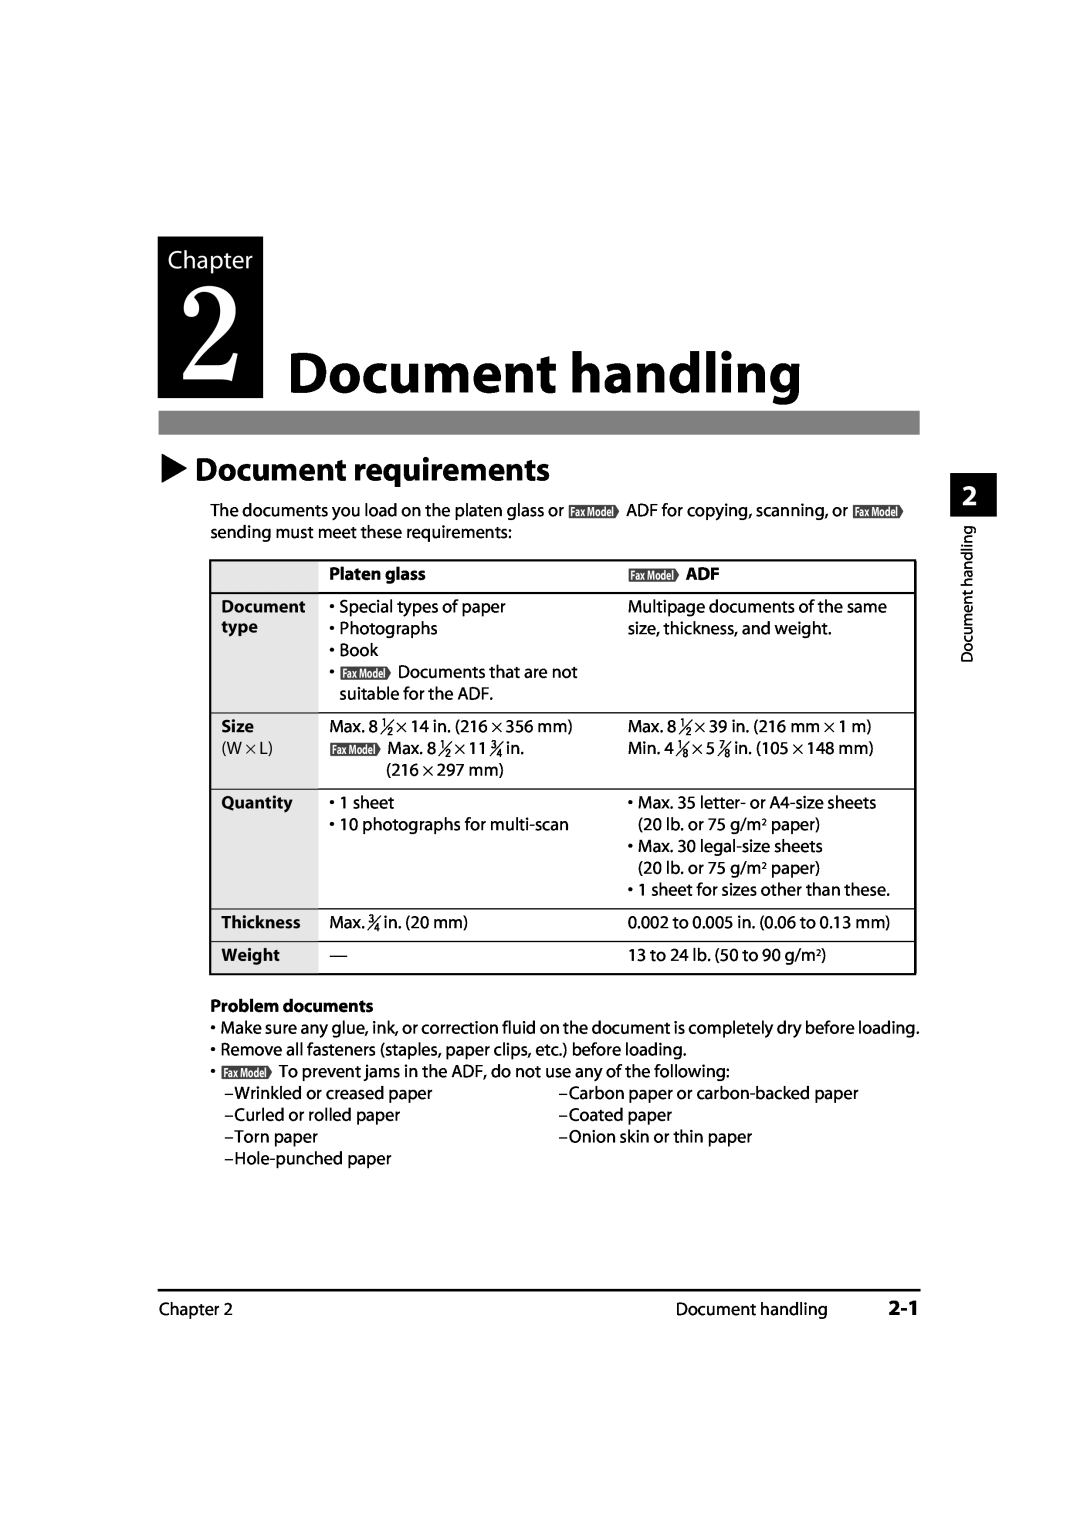 Canon 730i, MP700 Document handling, Document requirements, Chapter, Platen glass, type, Size, Quantity, Thickness, Weight 